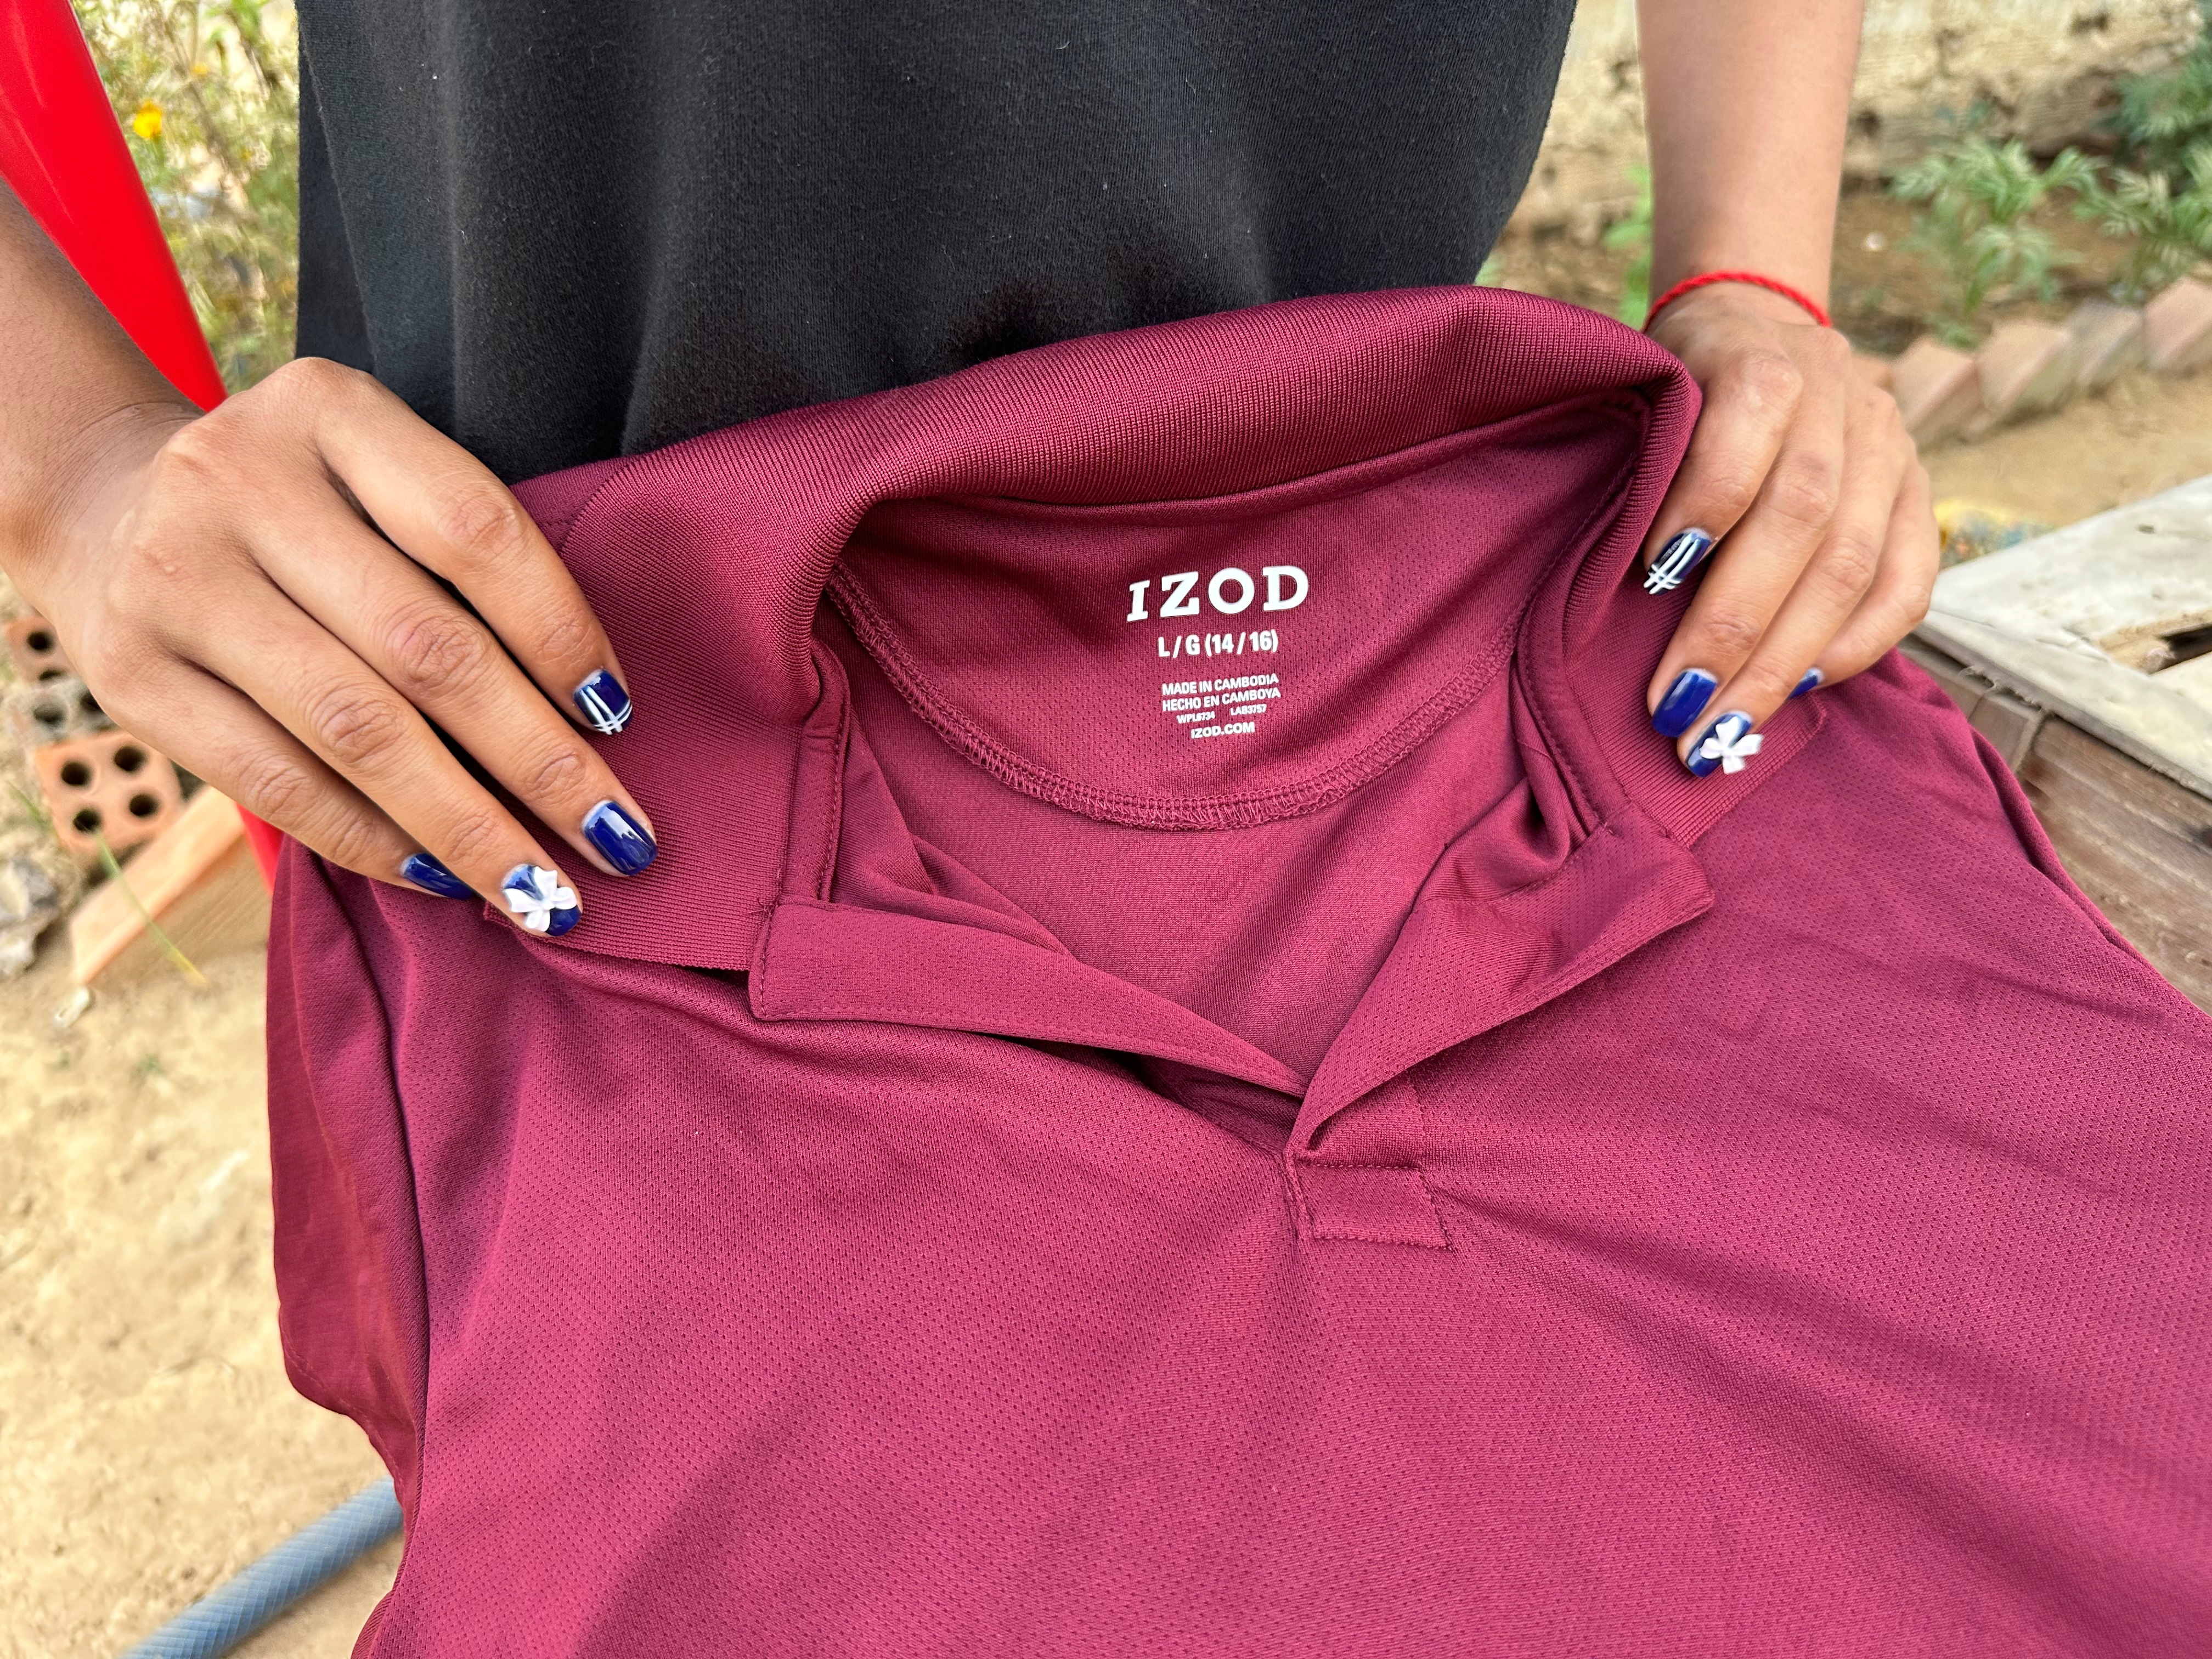 A former inmate at Correctional Center 2, a women’s prison on the outskirts of Phnom Penh, holds a polo shirt with an IZOD label that she said was made in a factory on prison grounds, at an undisclosed location in Cambodia